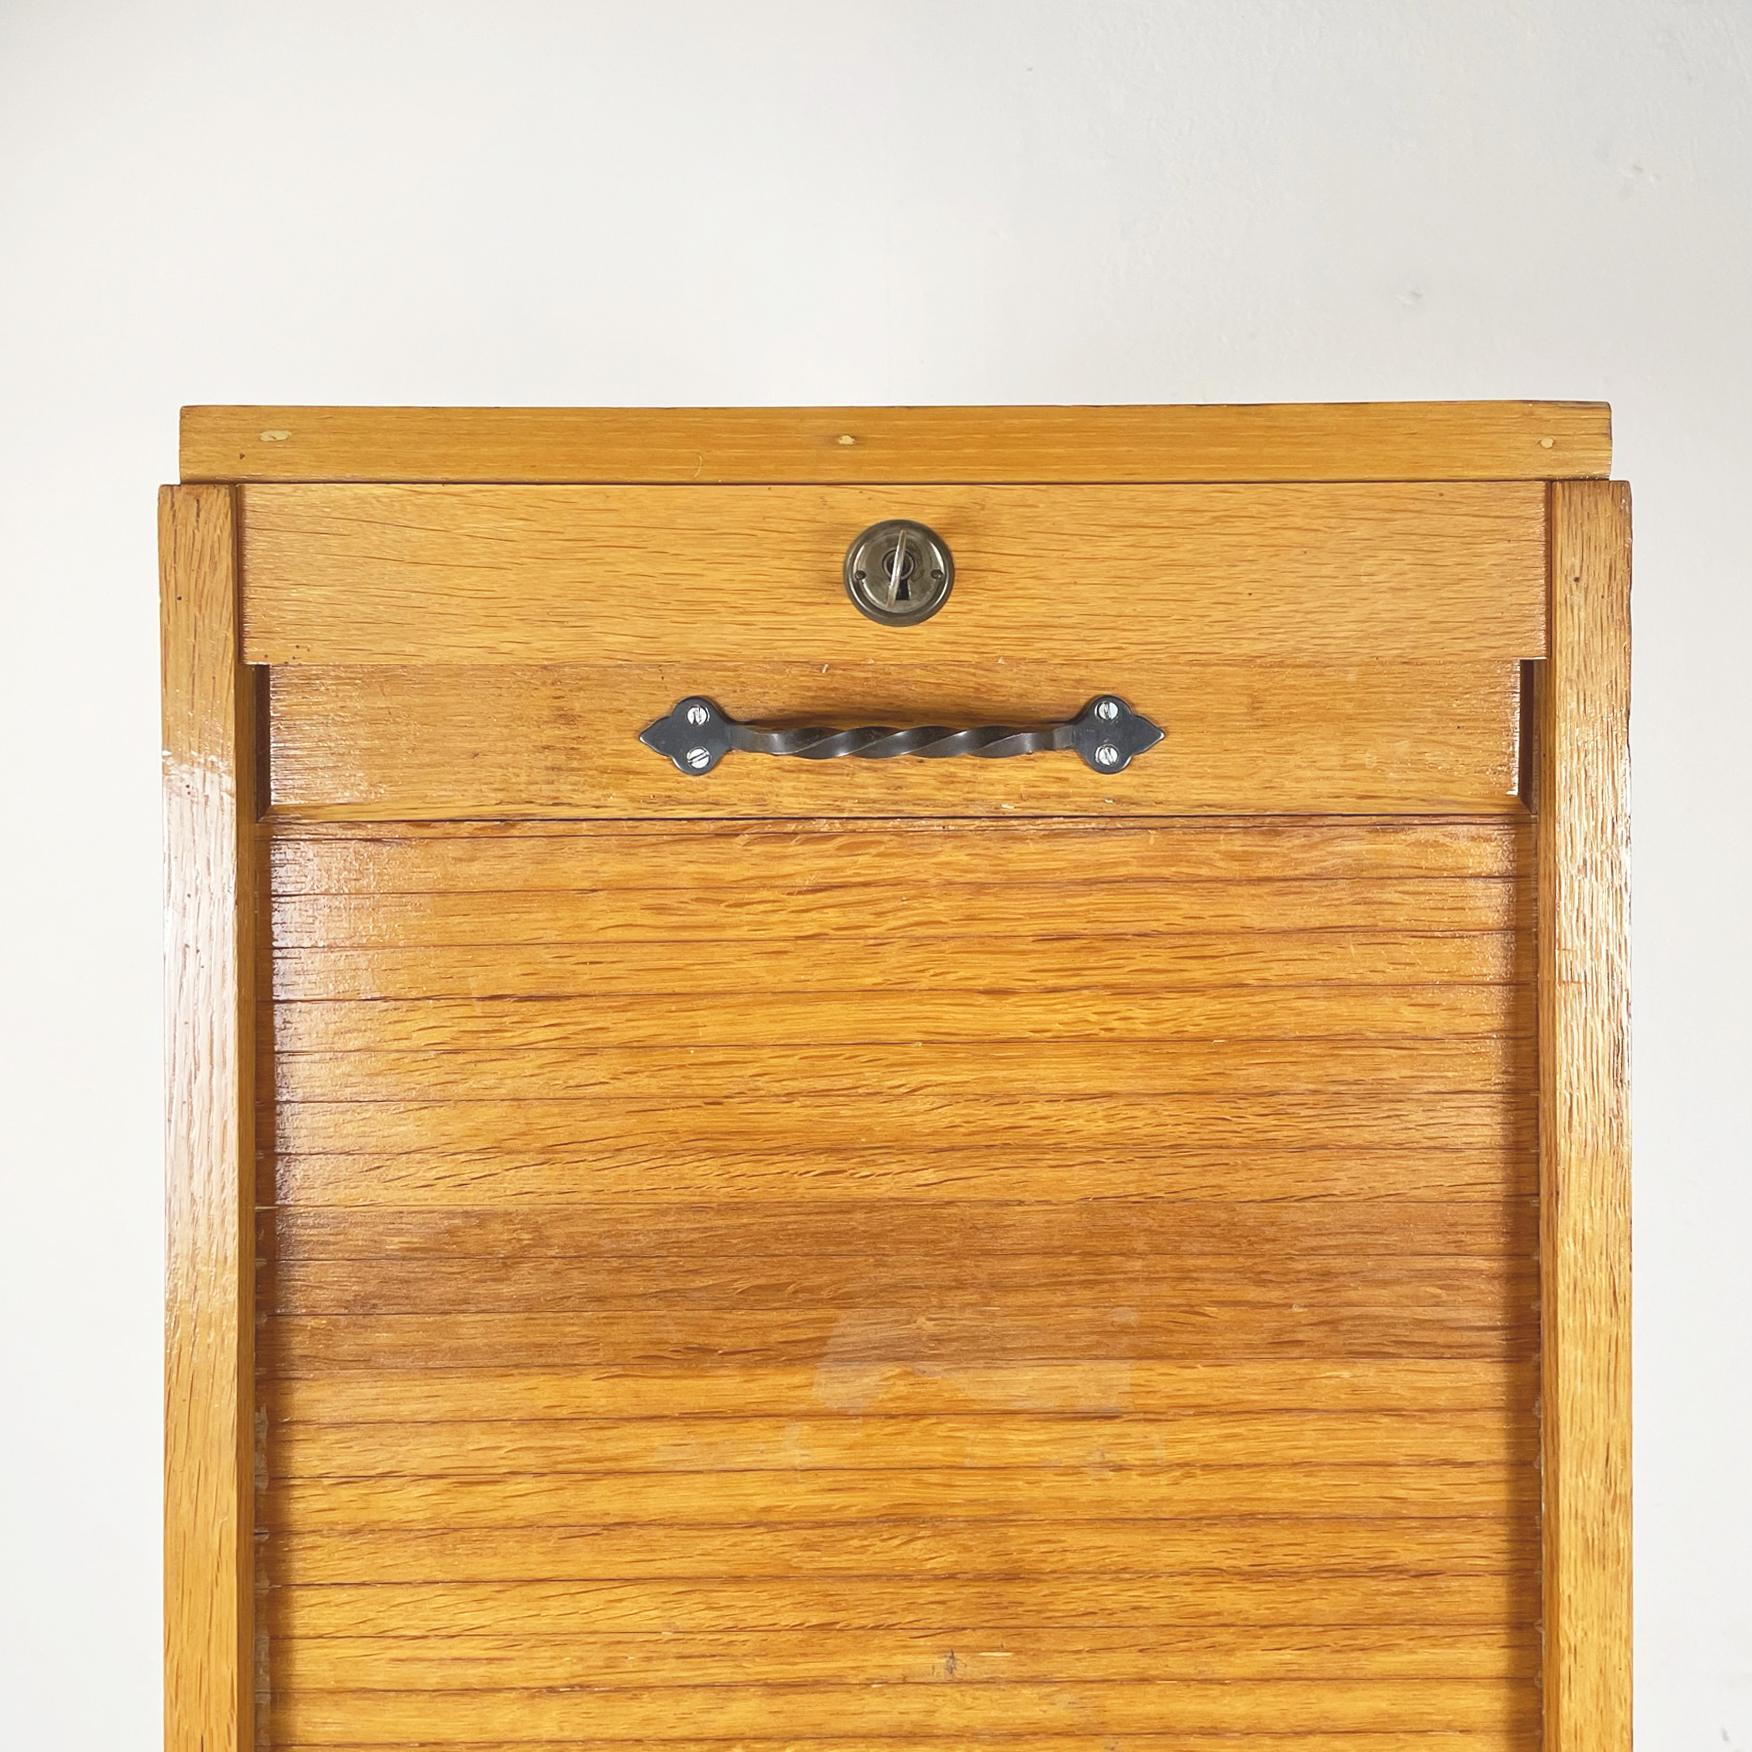 Italian Mid-Century Modern Wooden Office Filing Cabine Archive Dresser, 1940s For Sale 3